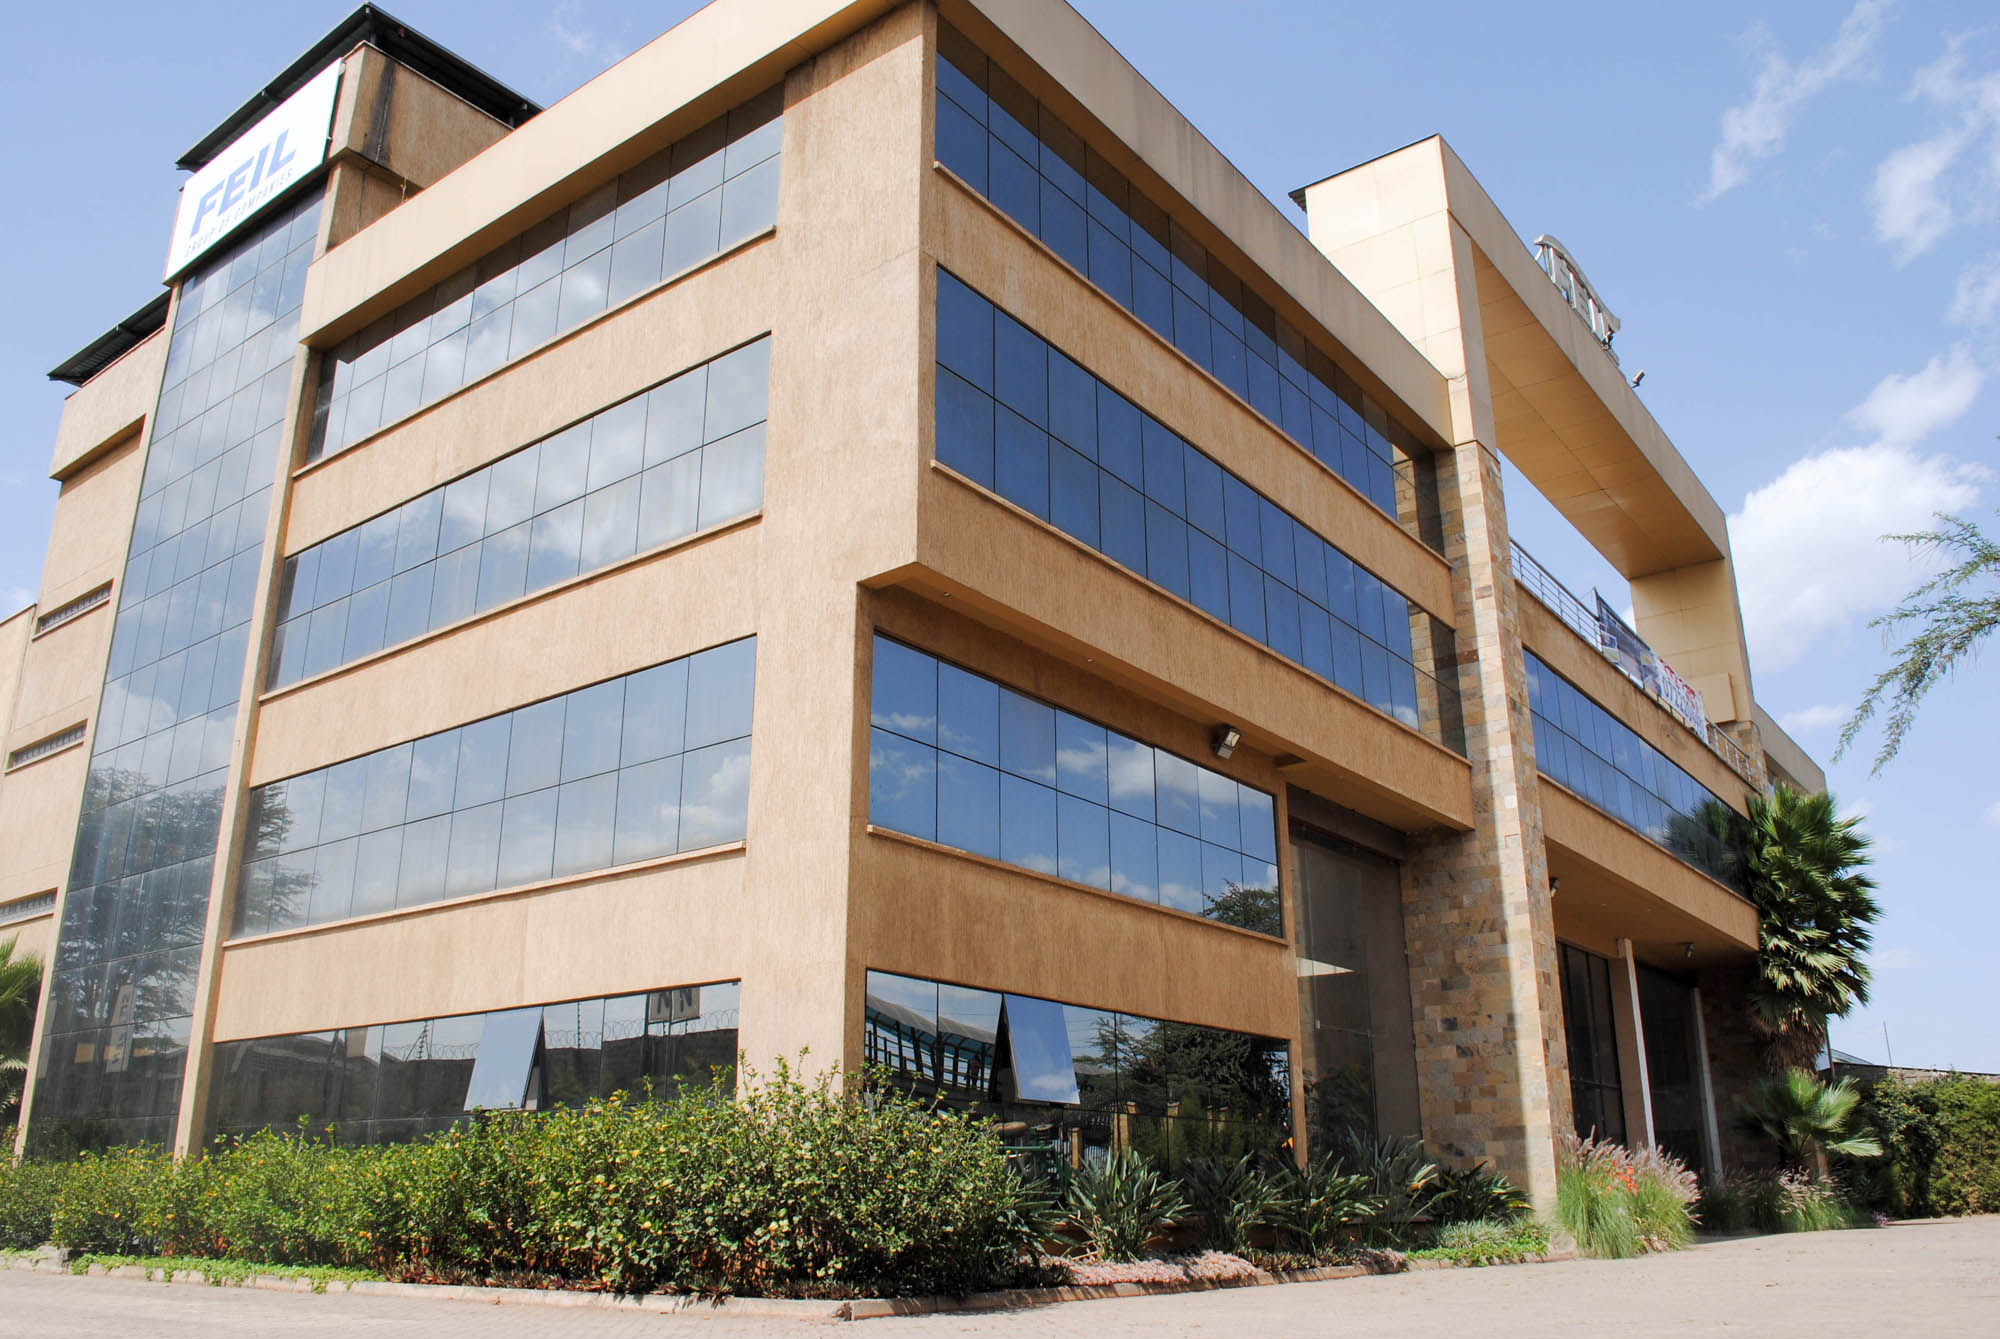 71,095.64 sqft Front-Row Offices with Godowns on Mombasa Road